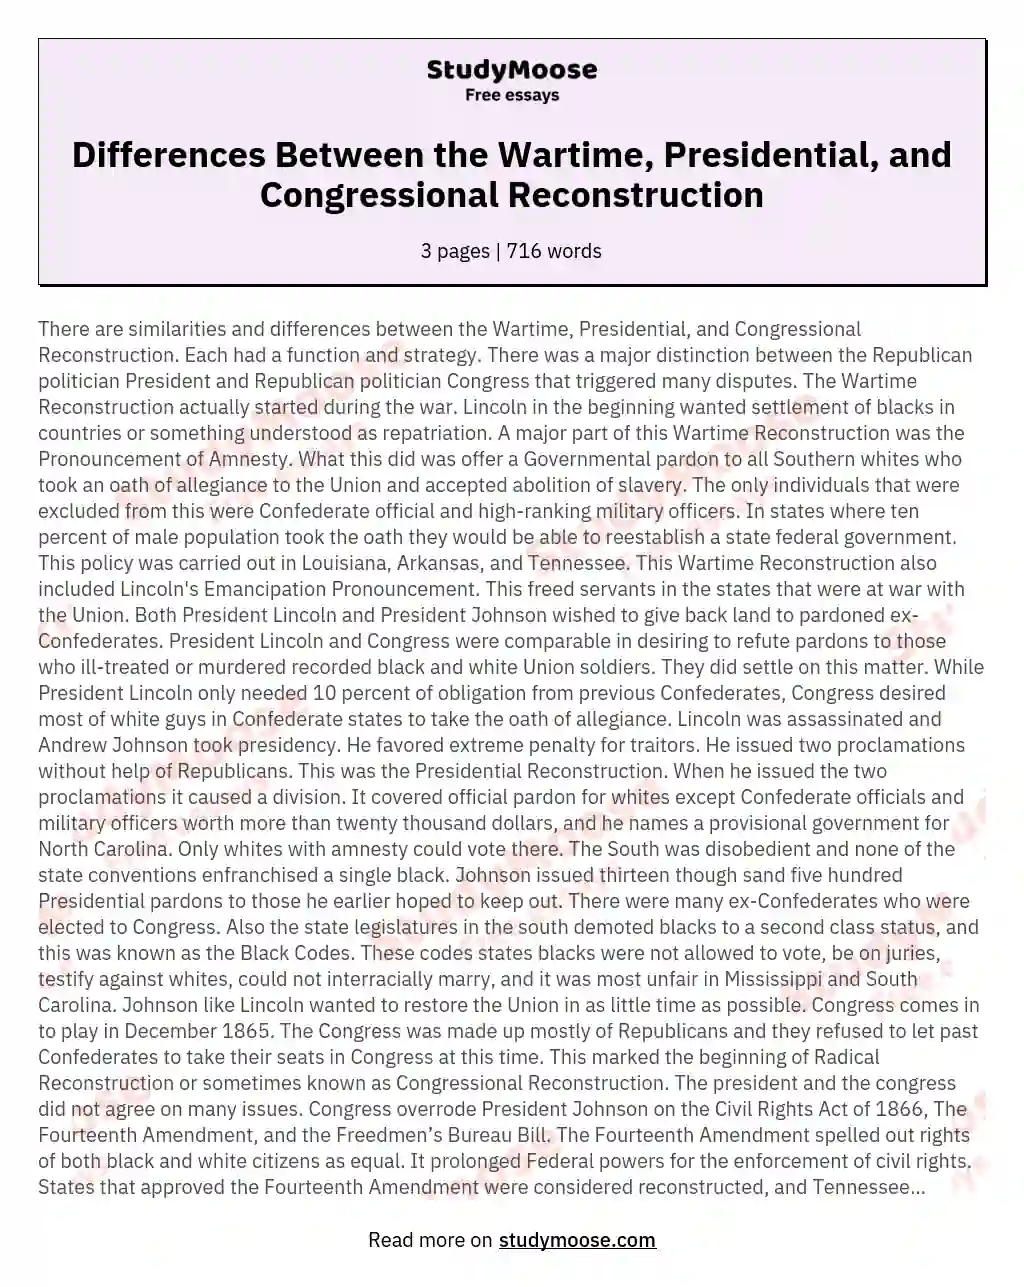 Differences Between the Wartime, Presidential, and Congressional Reconstruction essay